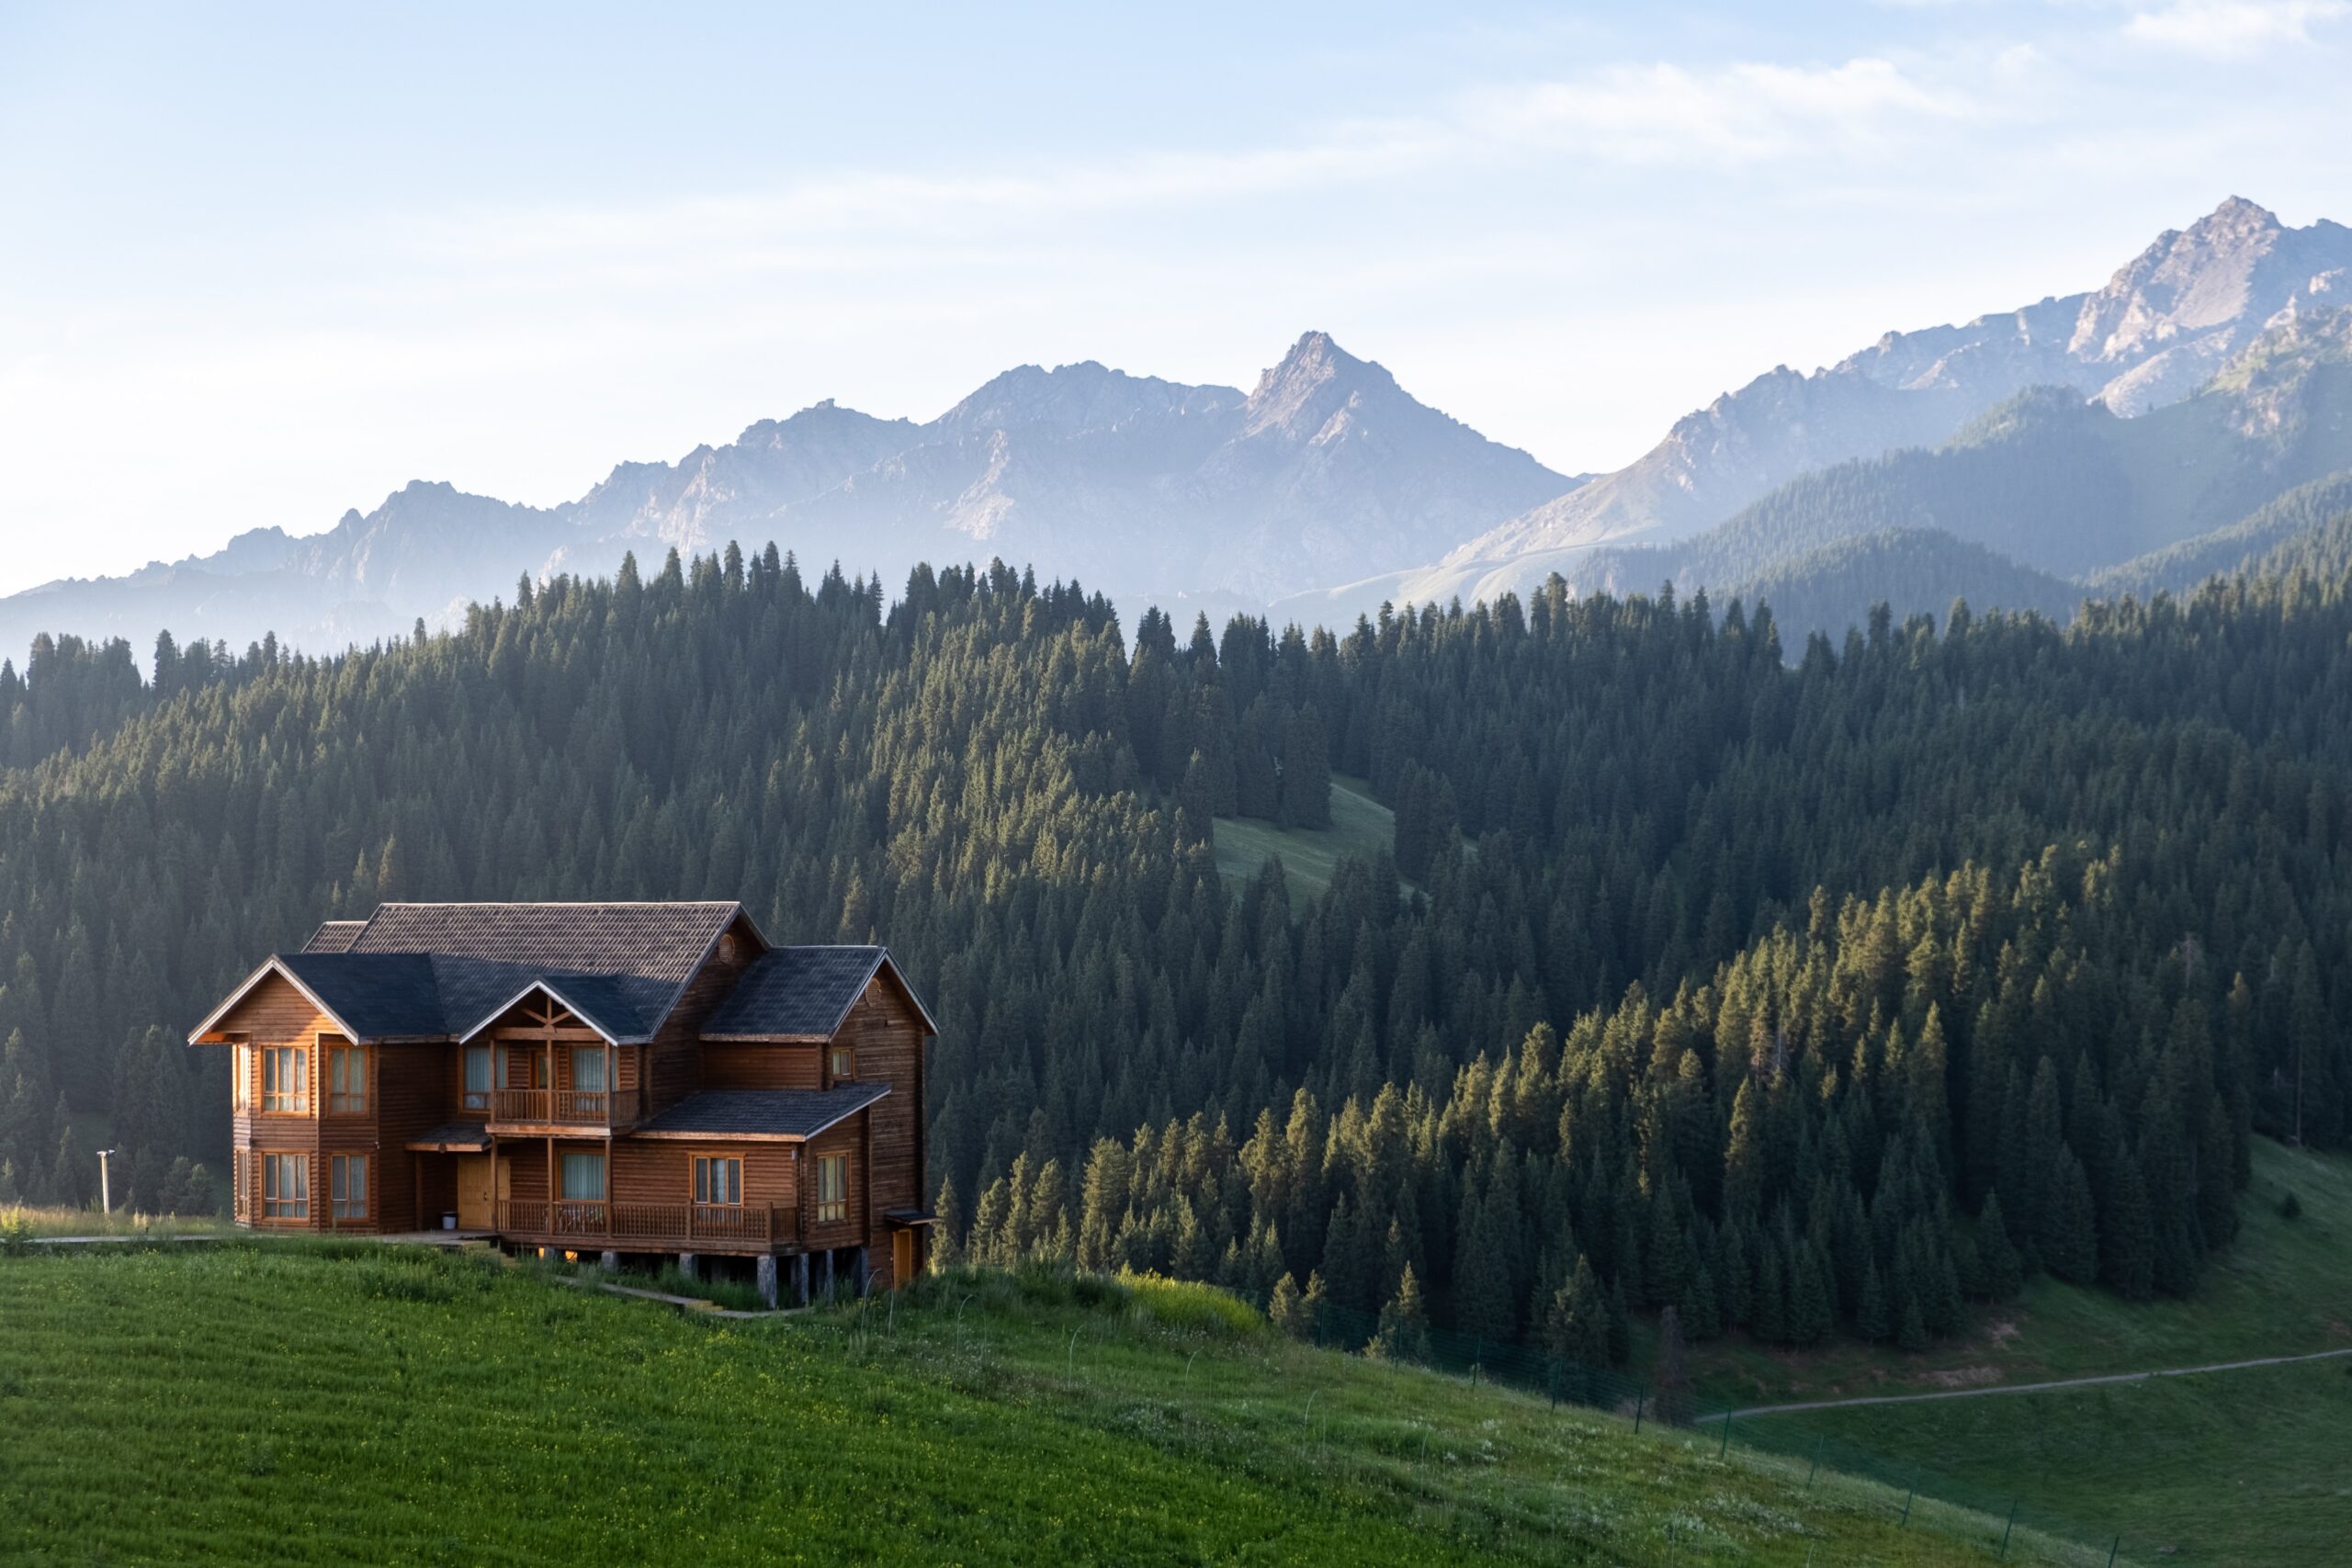 A house with a mountain view. Photo by: Pexels.com